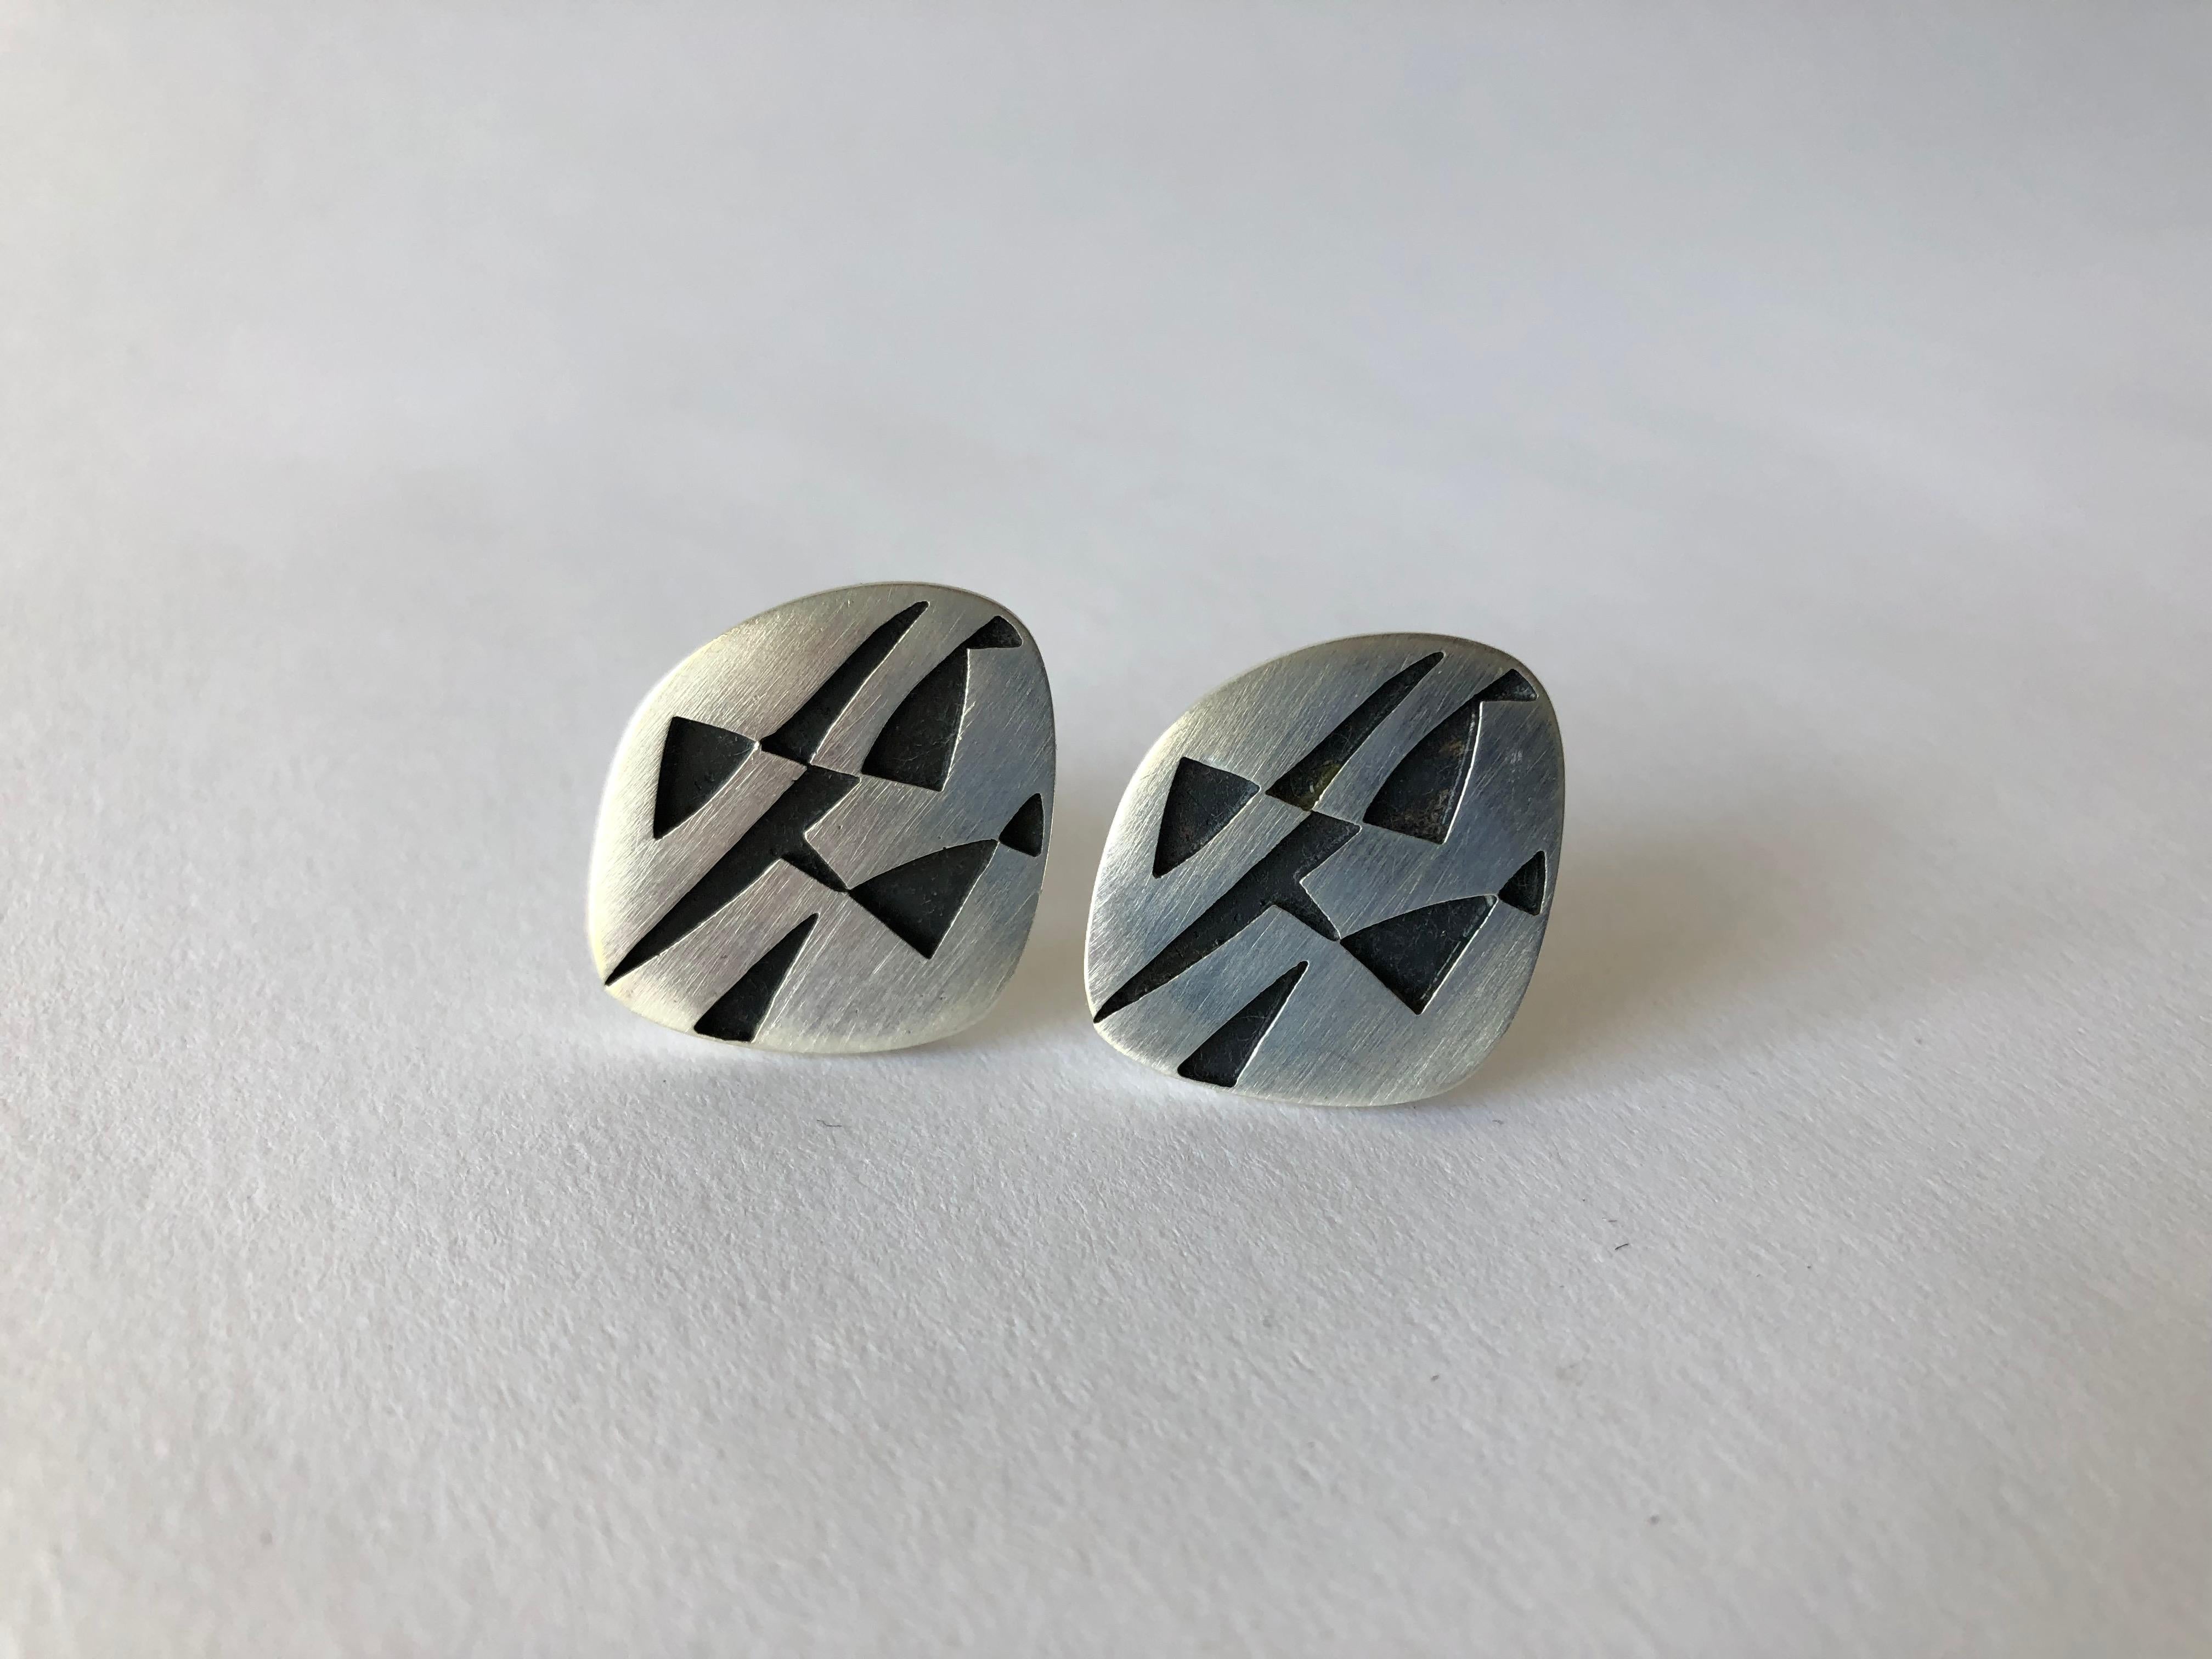 Large scale brushed sterling silver cufflinks with cut out geometric design created by Rotter, circa 1960.  Cufflinks measure 1.25